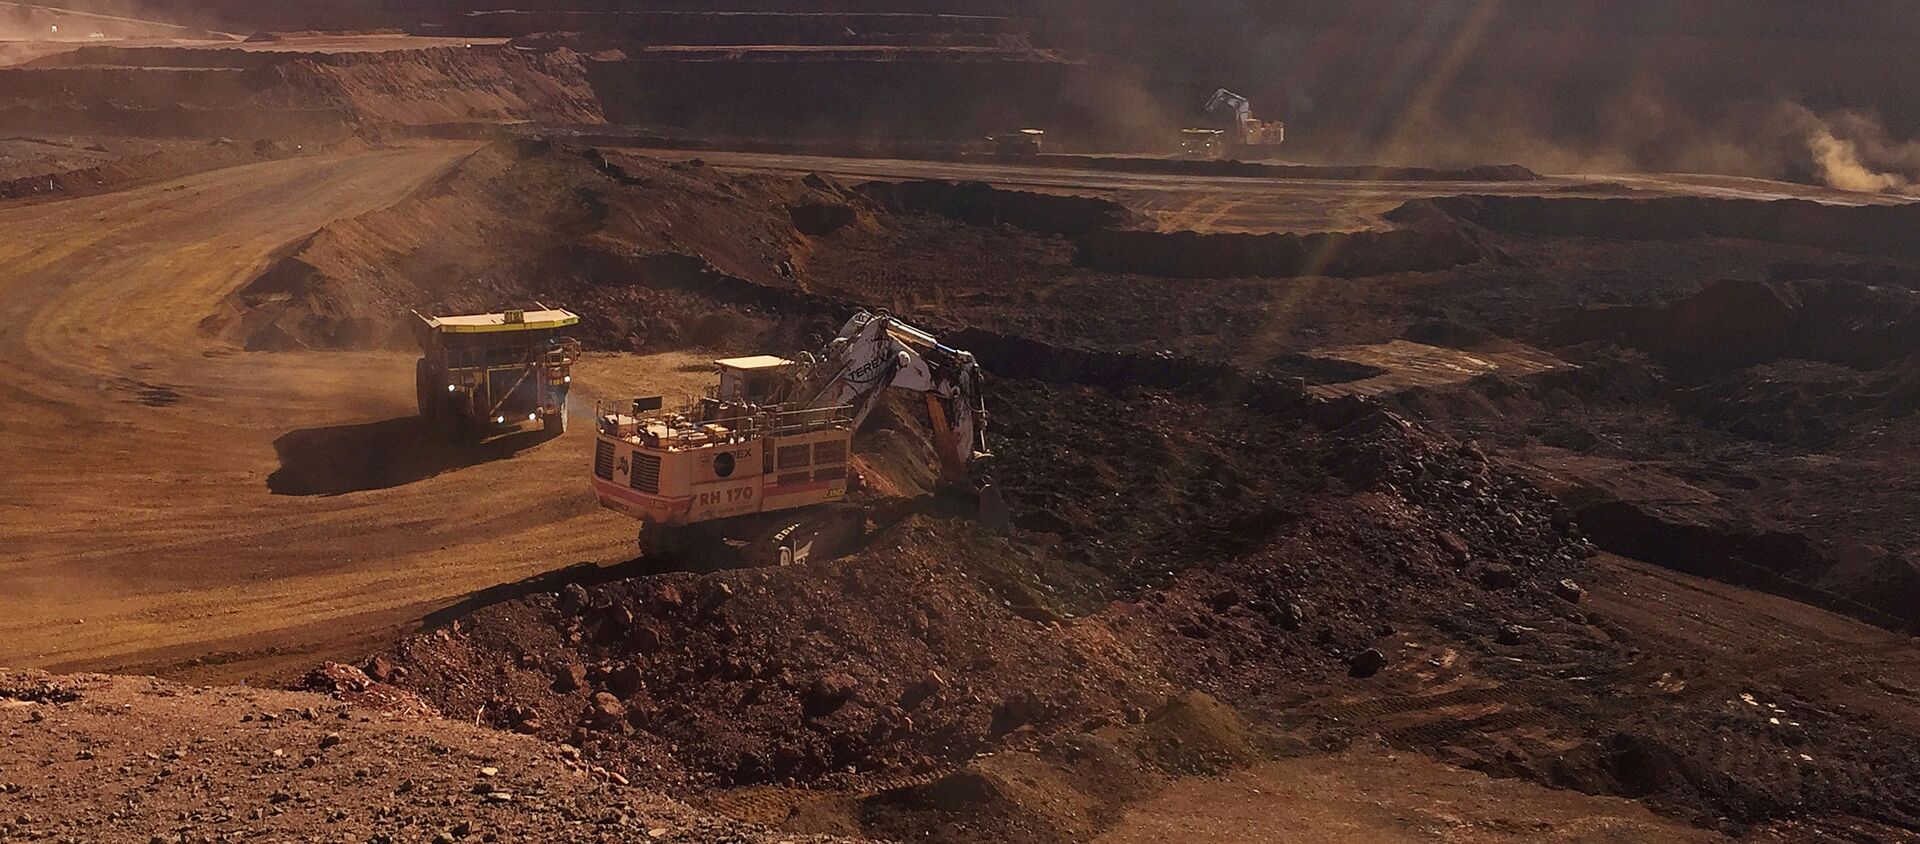 An autonomous truck readies to pick up a load of iron ore at Australia's Fortescue Metals Group (FMG) Chichester Hub, which includes the Christmas Creek iron ore mine, in the Pilbara region, located southeast of the coastal town of Port Hedland in Western Australia, November 29, 2018 - Sputnik International, 1920, 06.04.2021